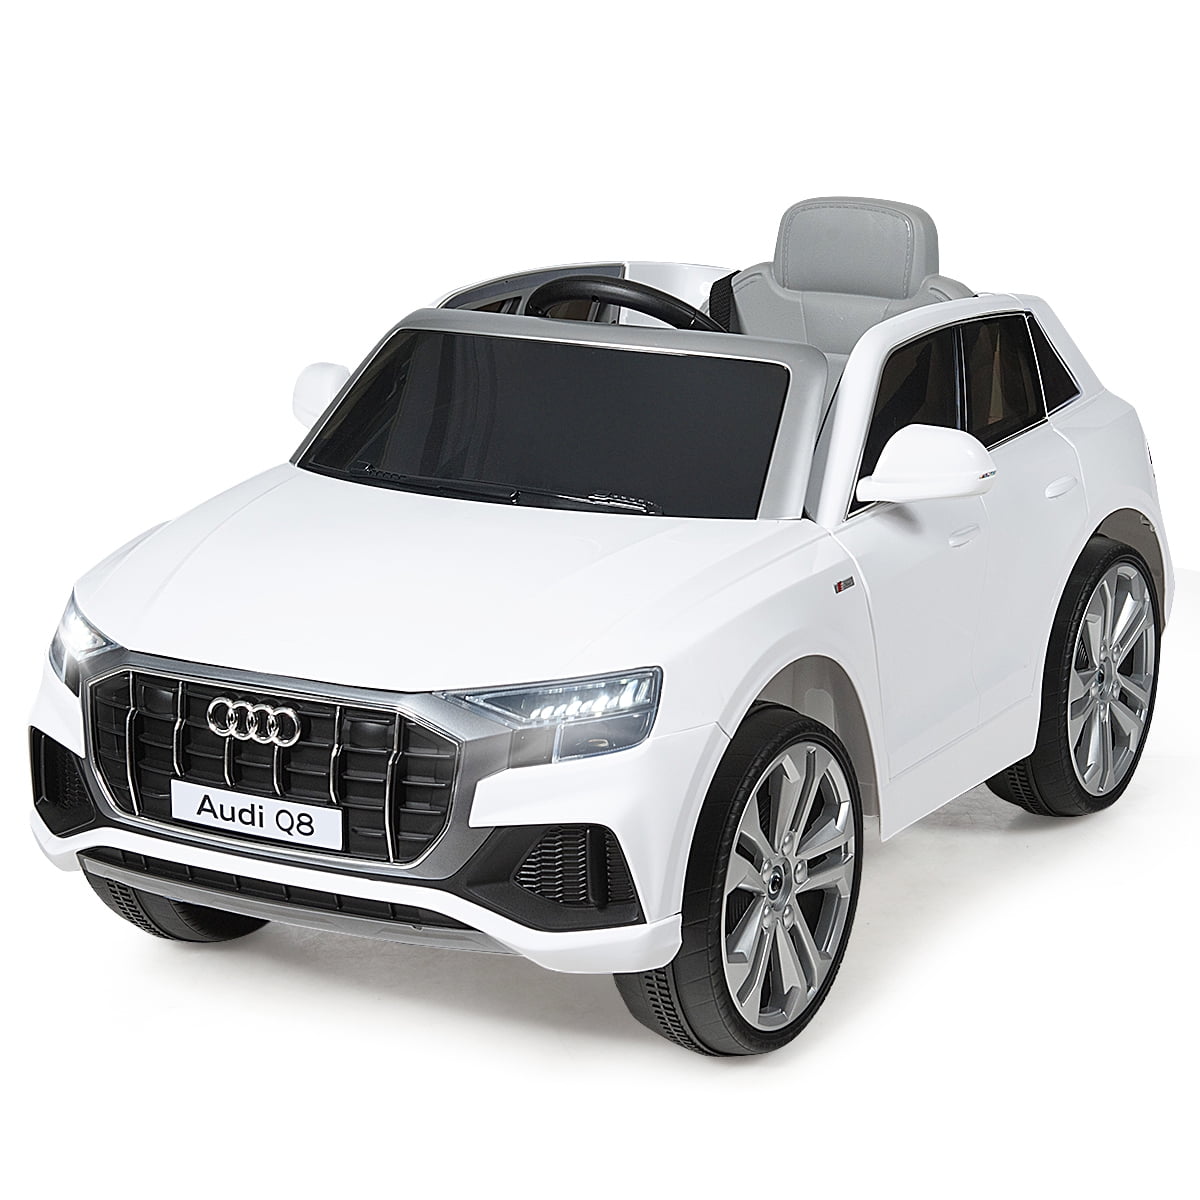 Audi R8 Q7 SUV 12V Kids Electric Toy Ride On Car self resetting thermal 10A fuse 